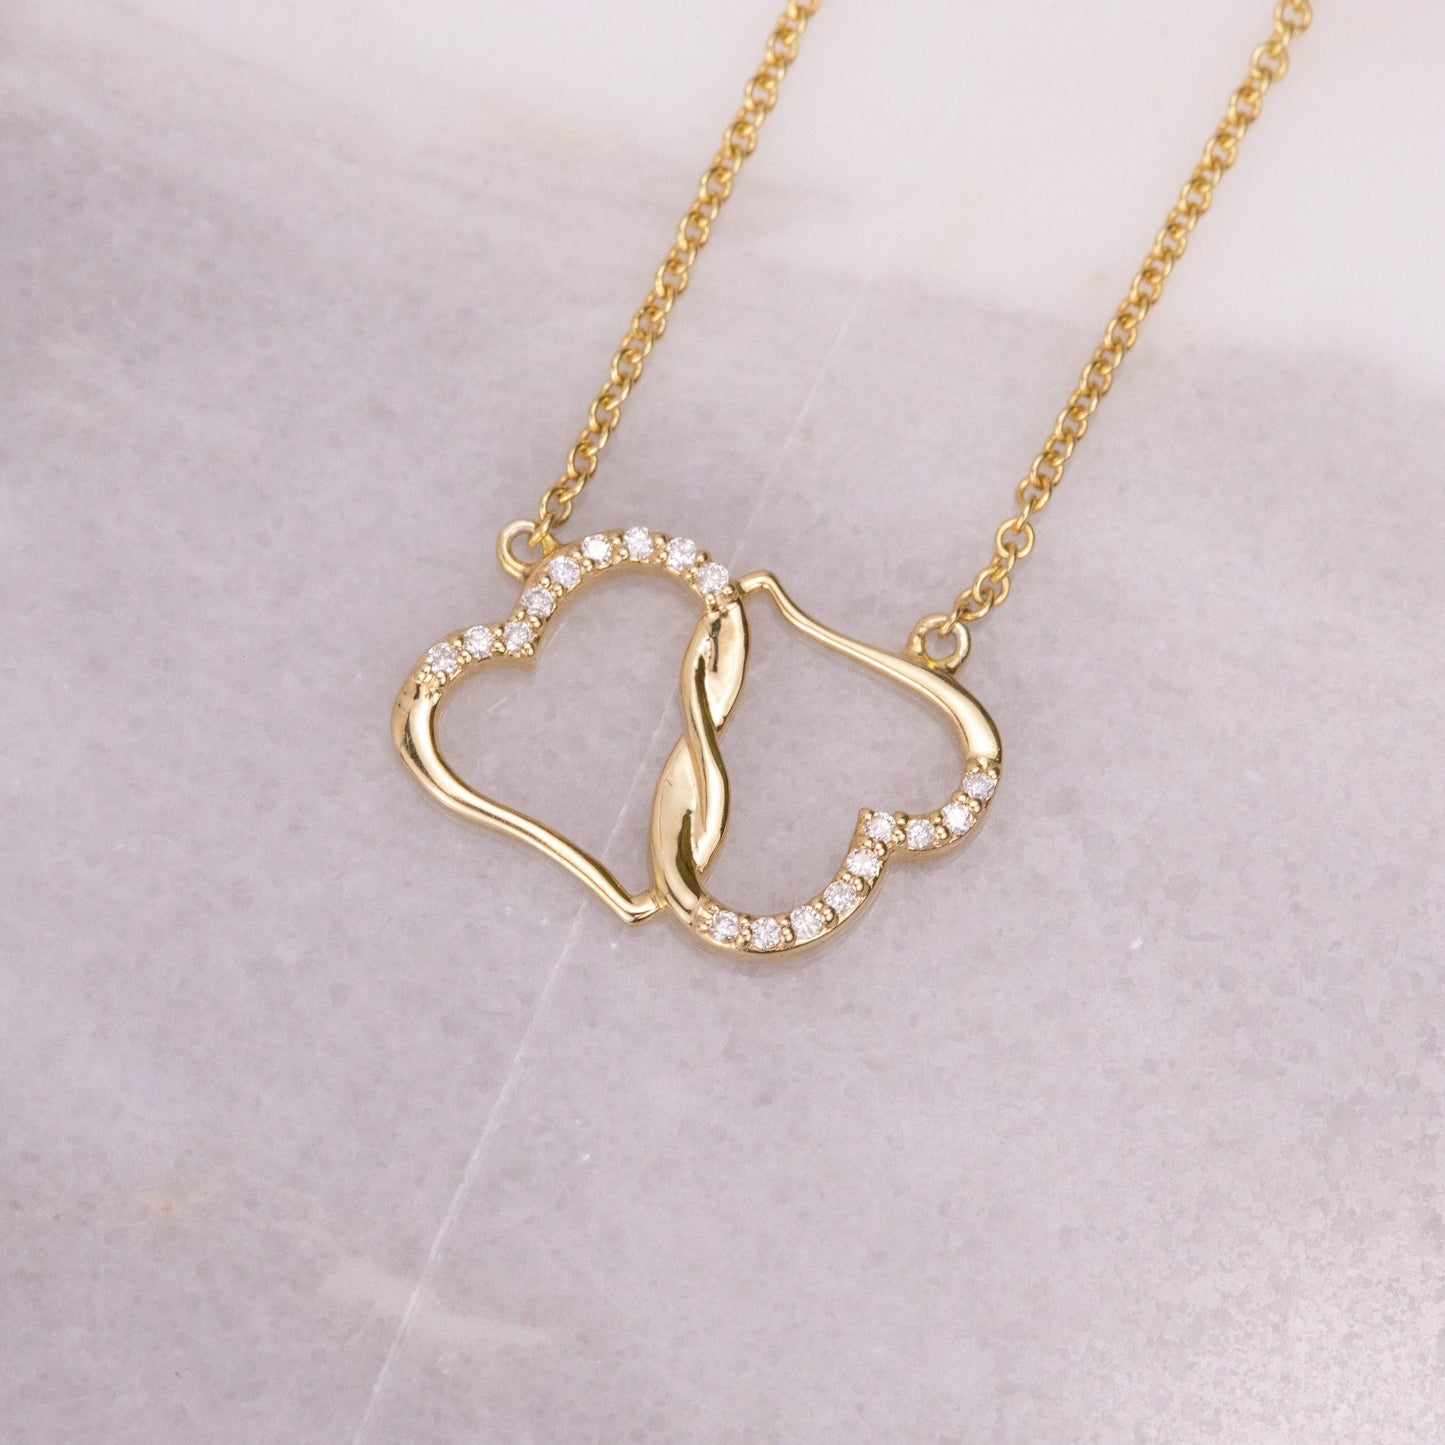 Jewelry gifts (Soulmate) Forever & Always - Solid Gold with Diamonds Necklace - Belesmé - Memorable Jewelry Gifts 